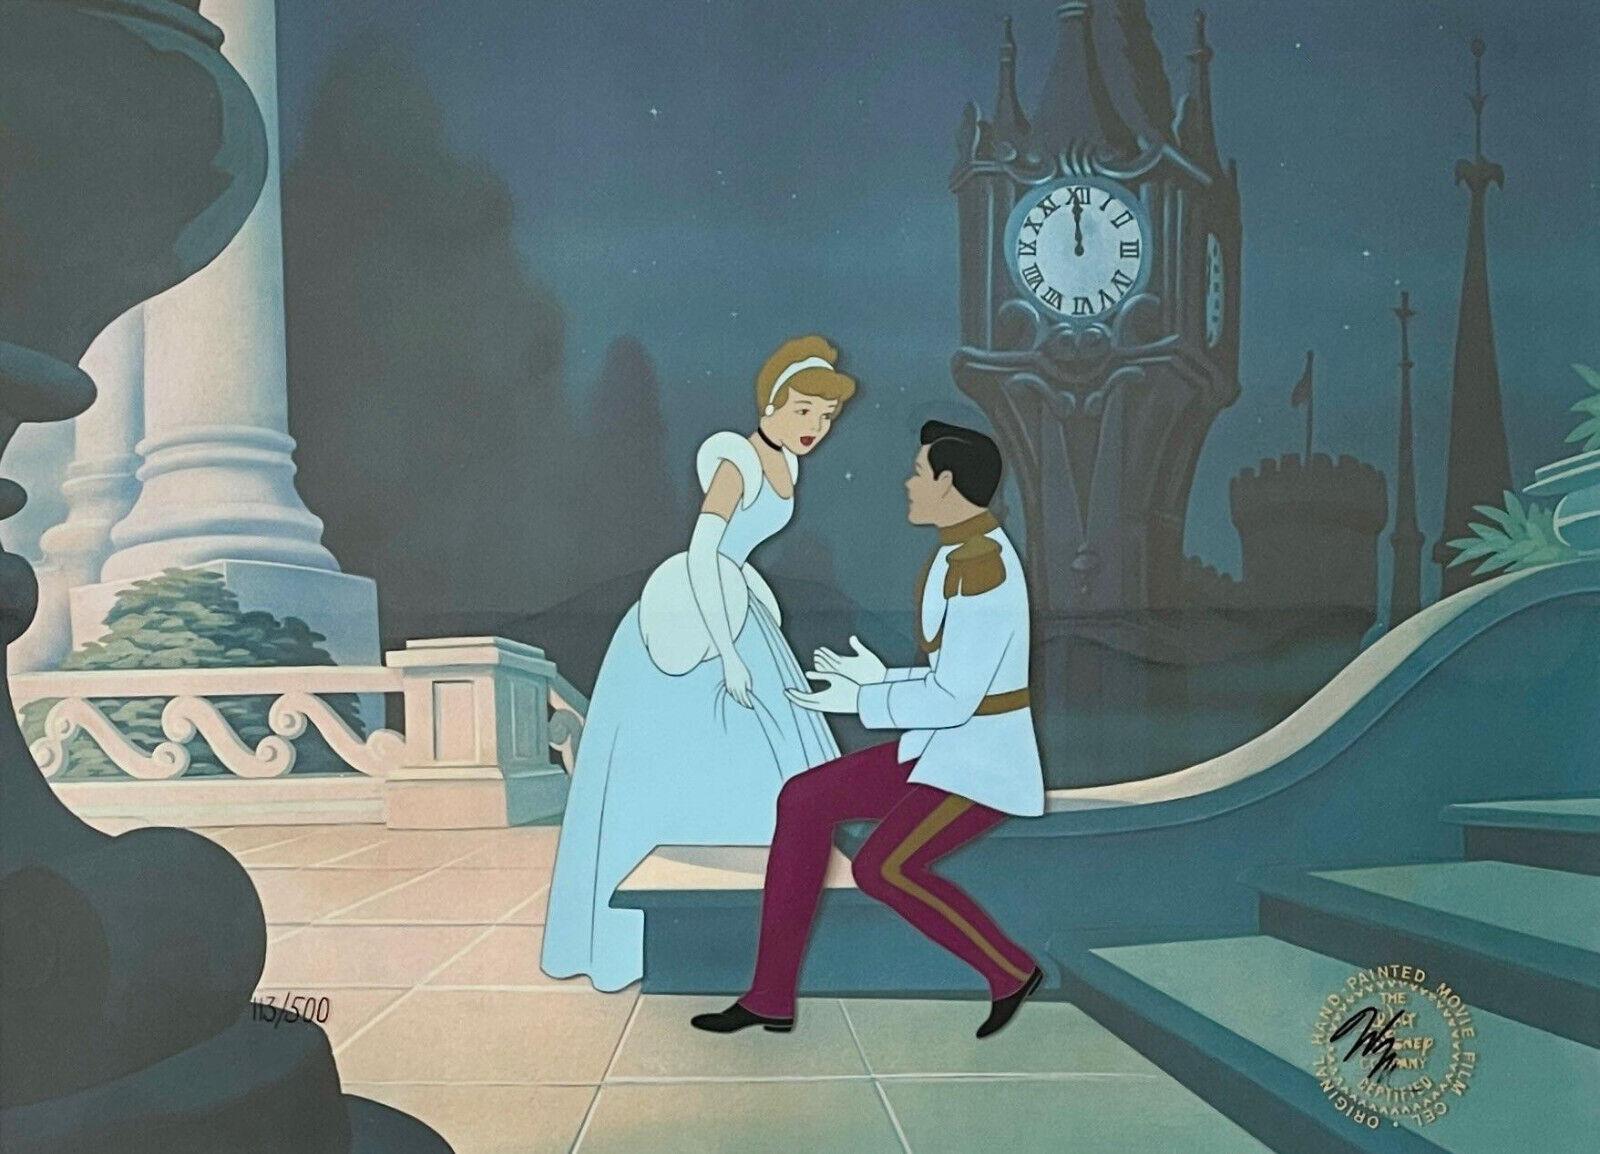 Cinderella and Prince Charming: Limited Edition Hand-Painted Cel - Art by Walt Disney Studio Artists